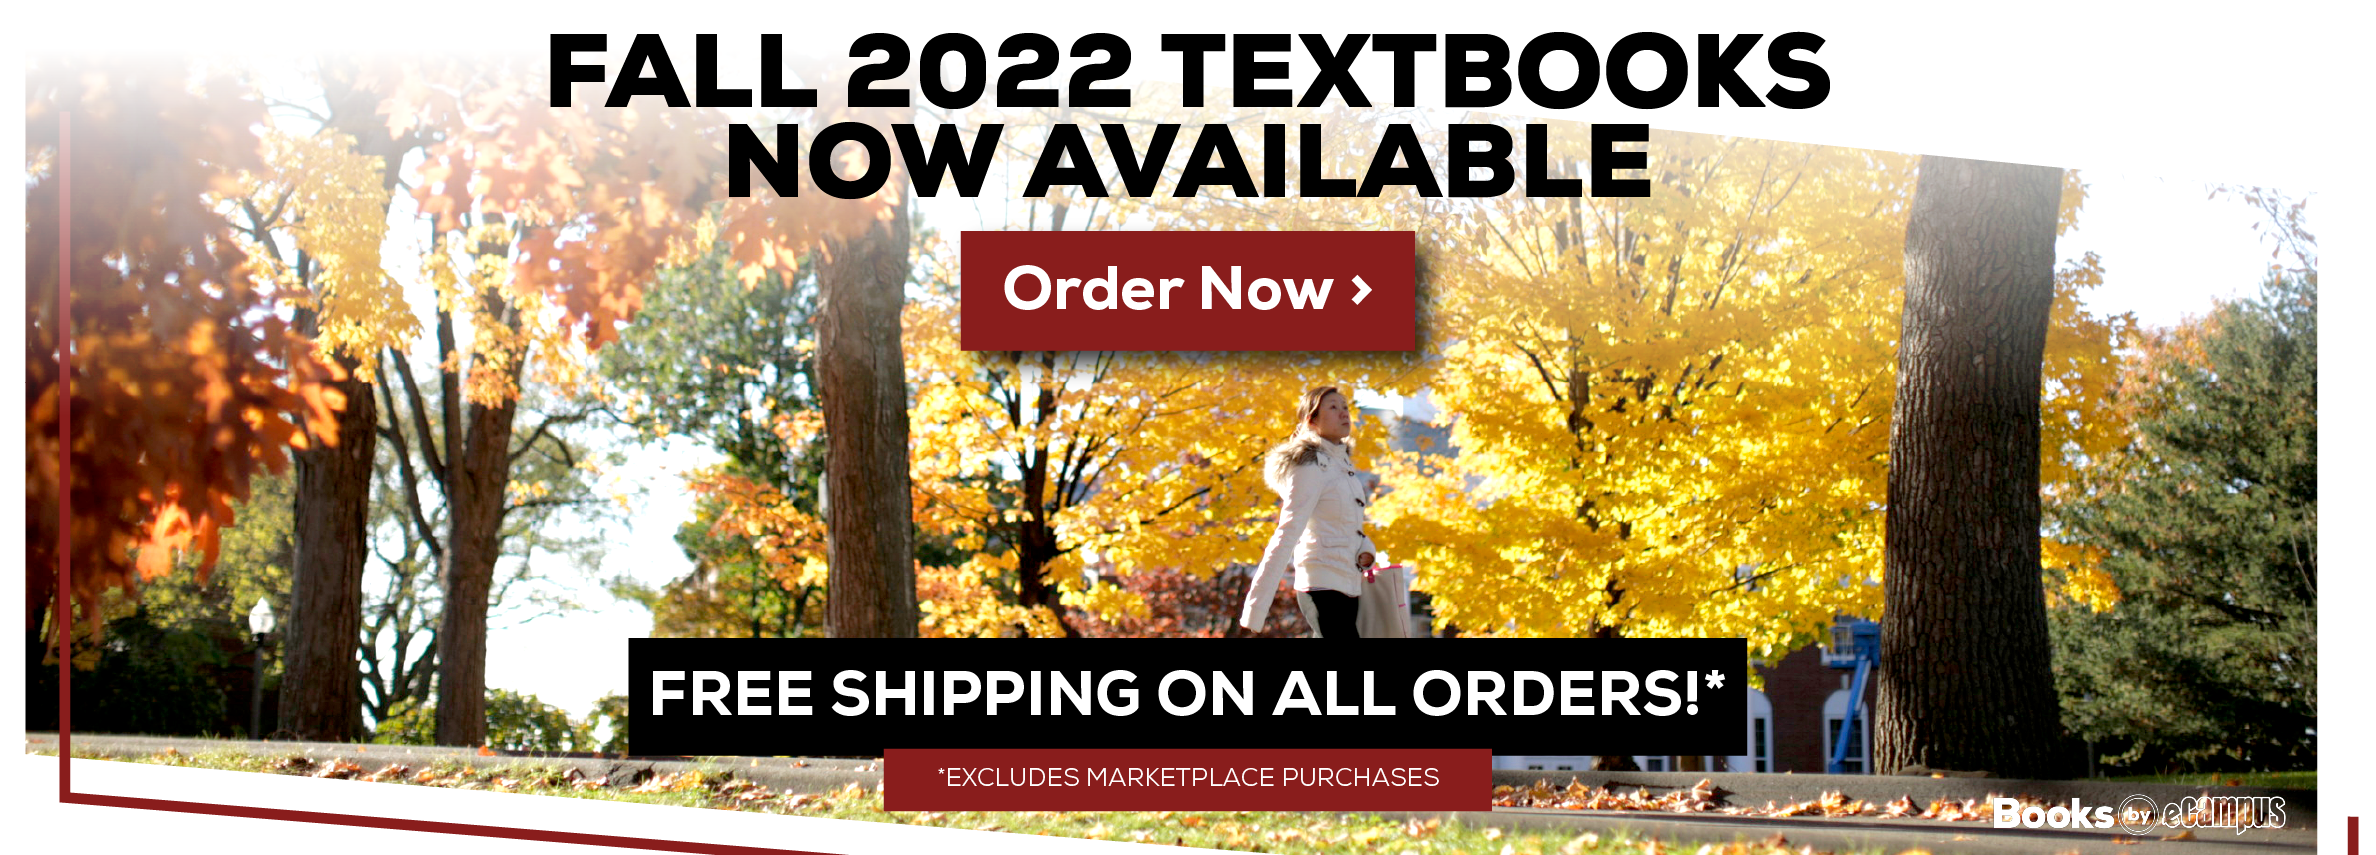 Fall  2022 Textbooks Now Available. Order Now. Free shipping on all orders.